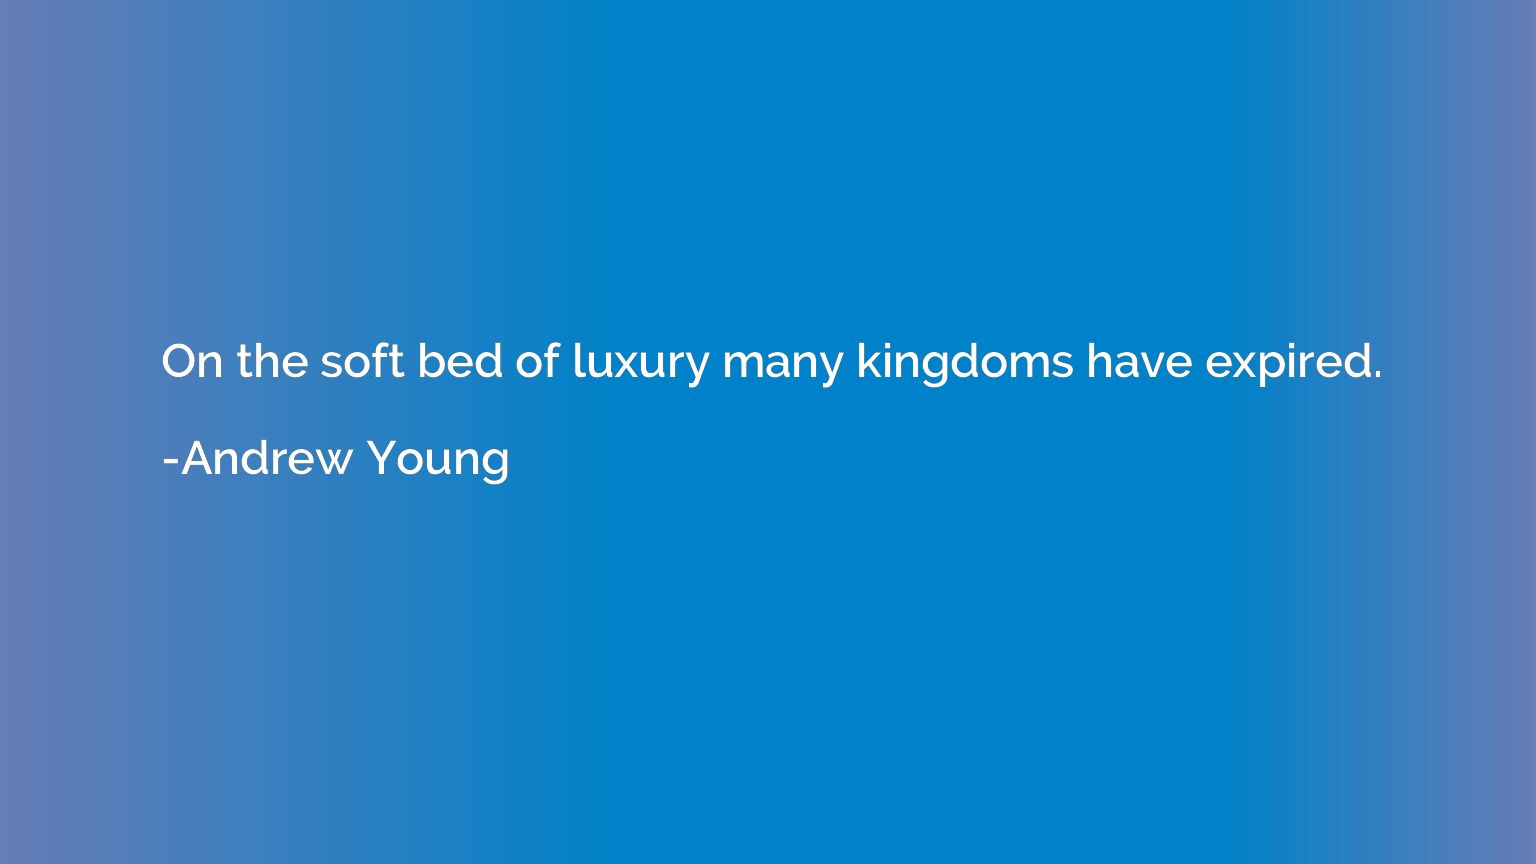 On the soft bed of luxury many kingdoms have expired.